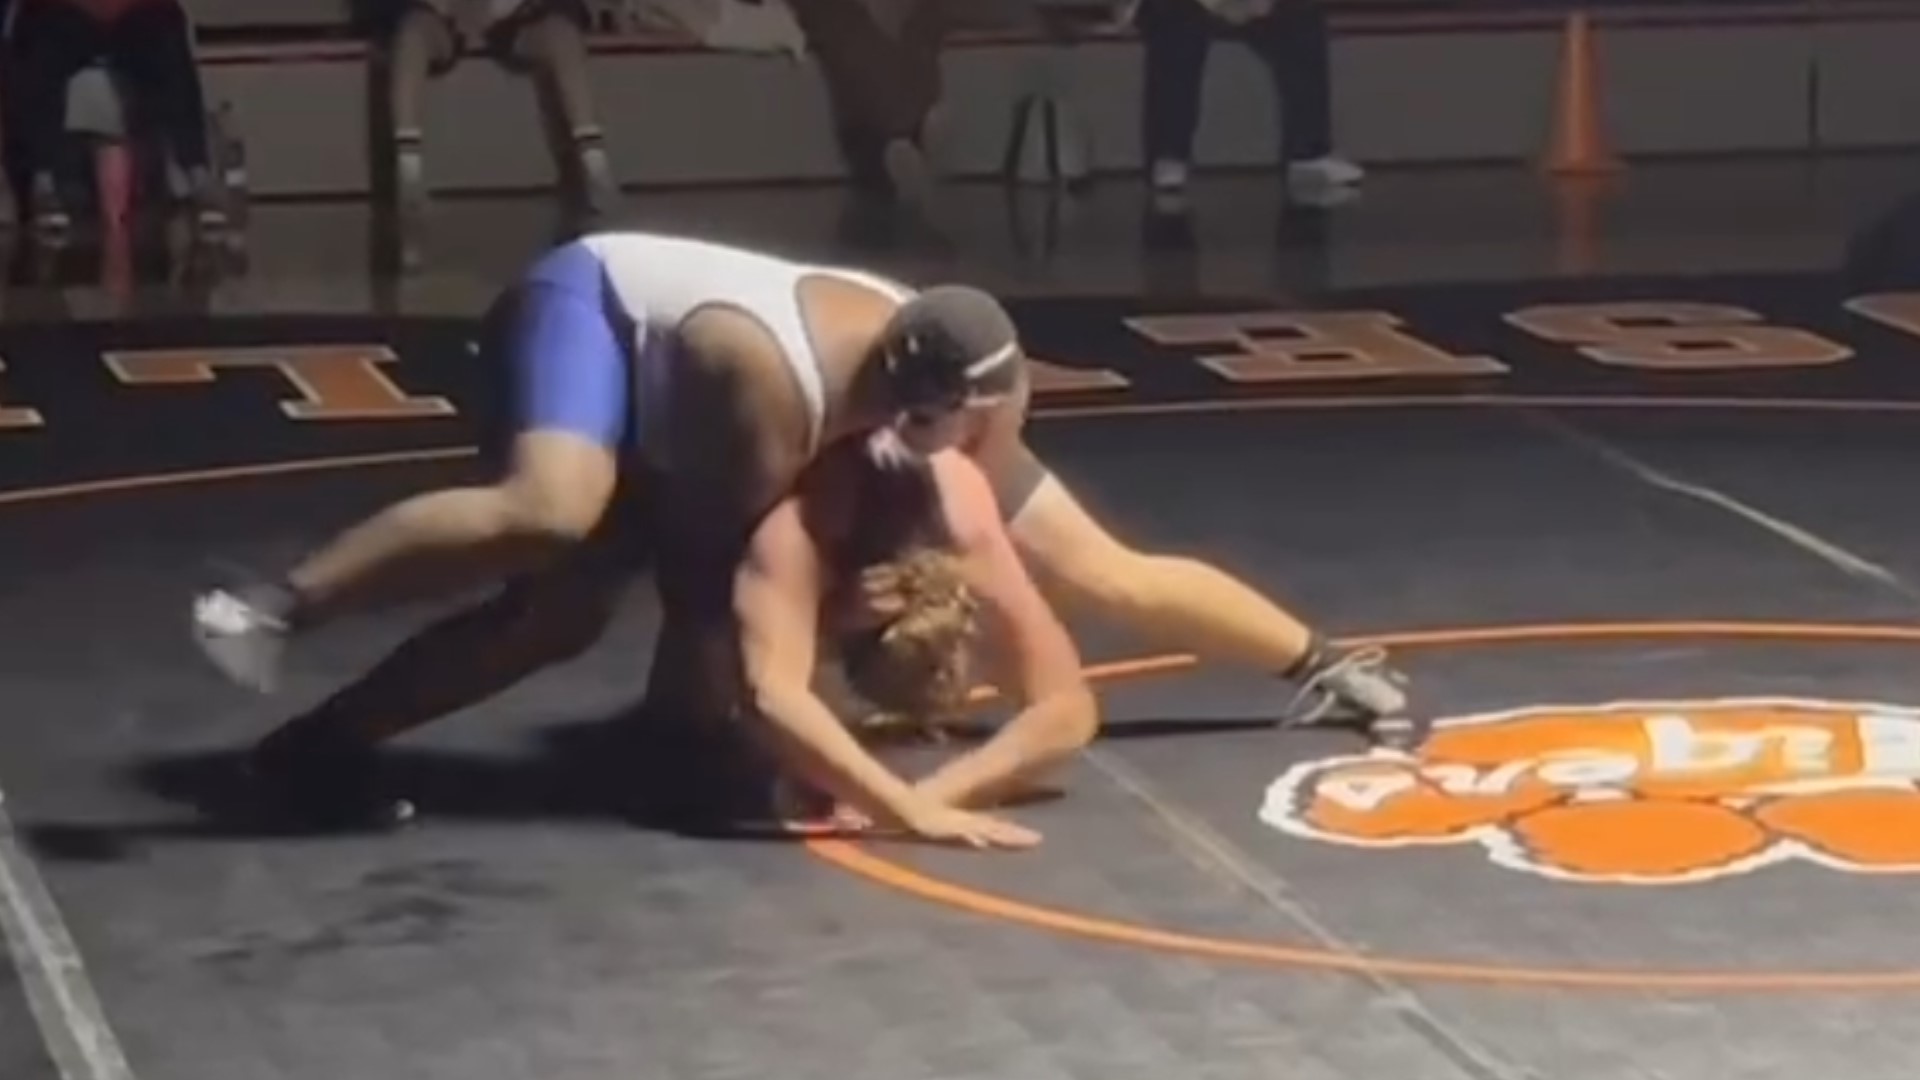 Roseville High School launches investigation into racial slurs and comments made during varsity wrestling match